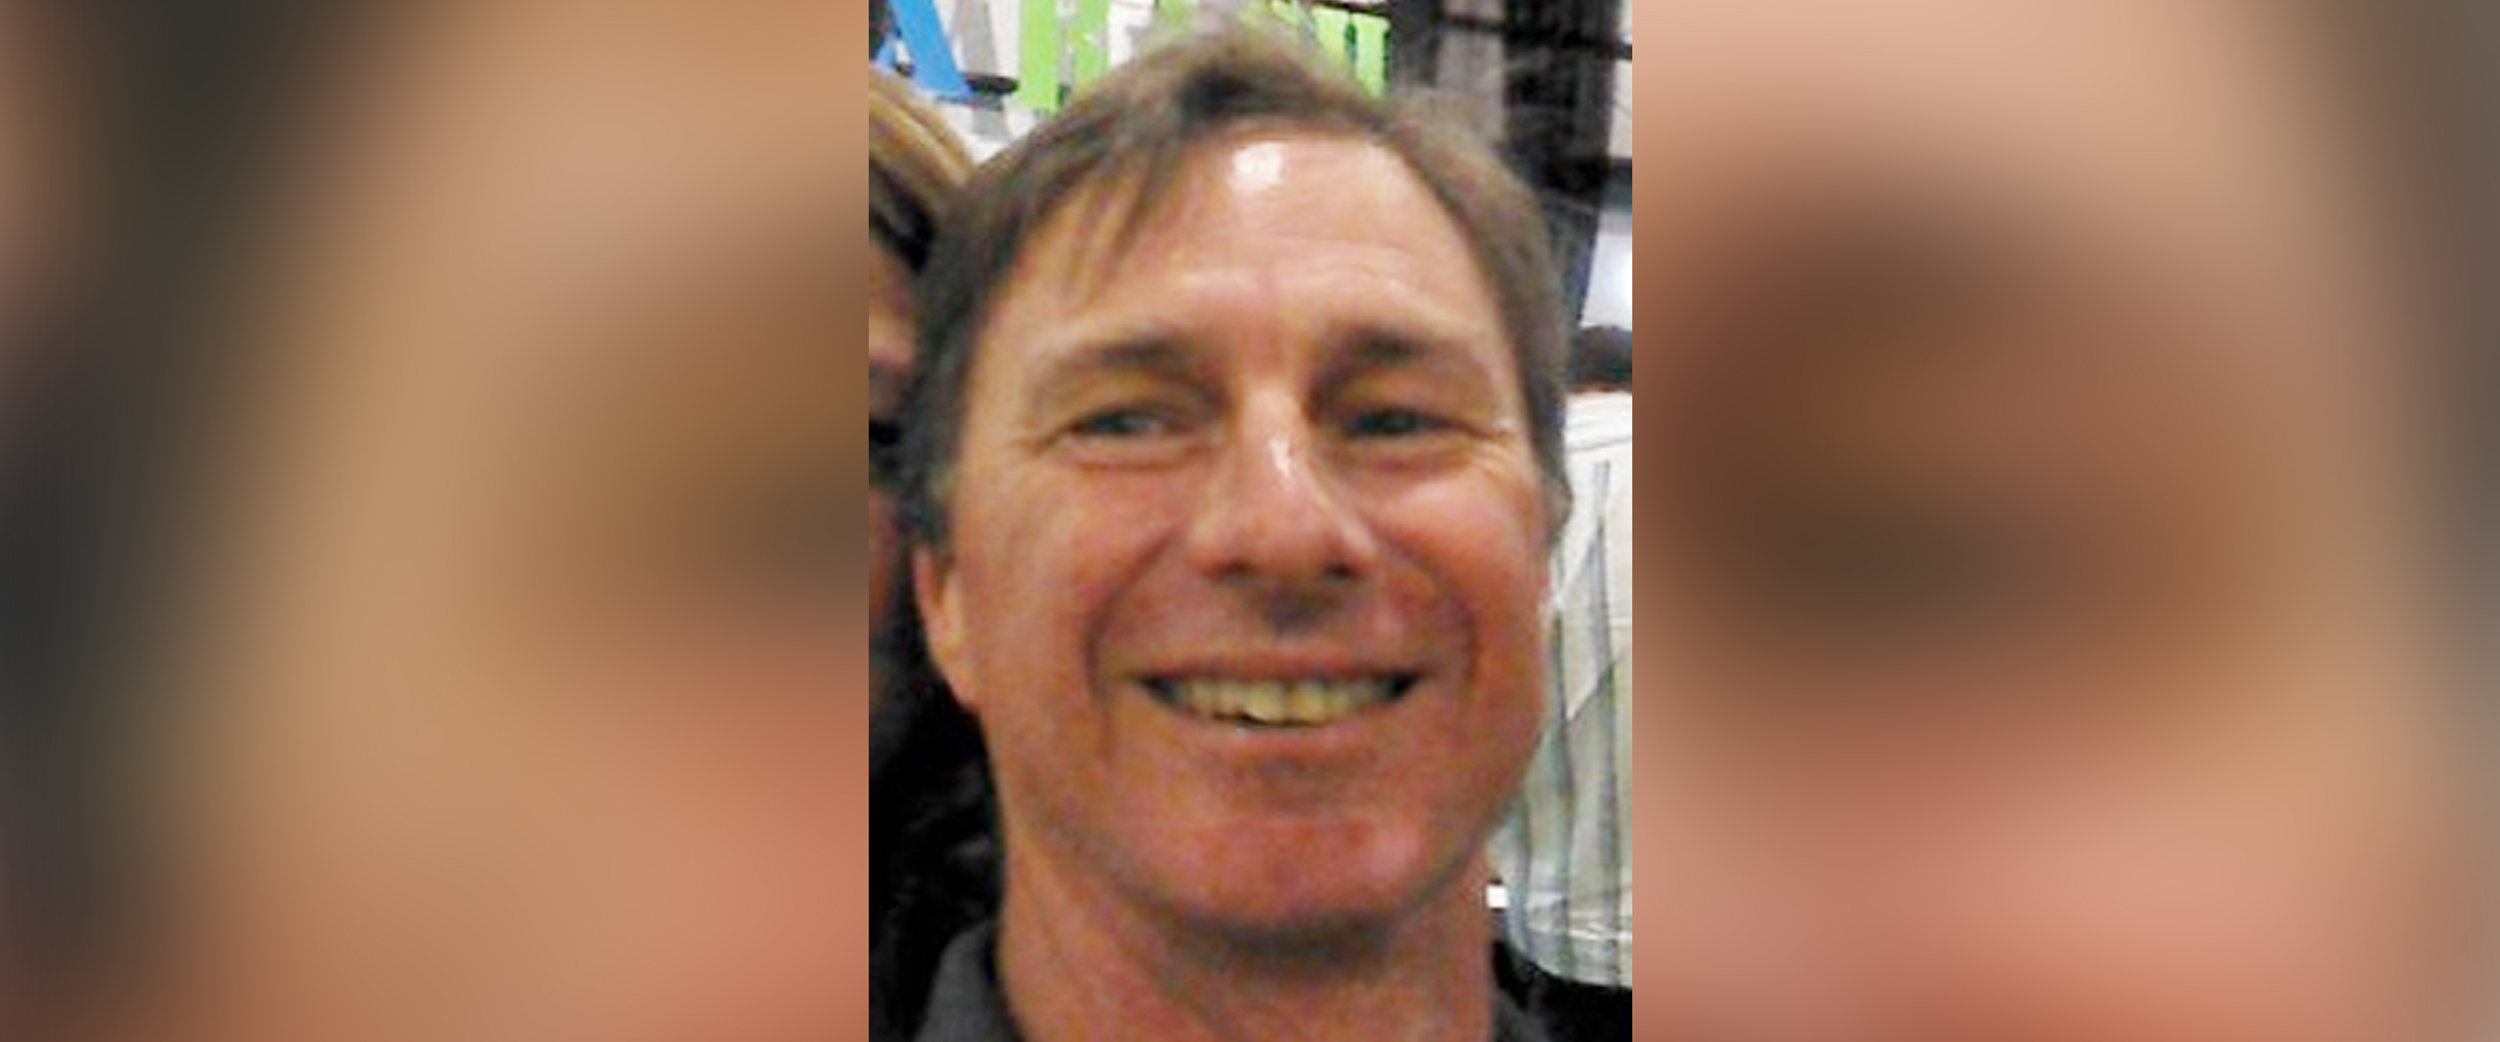 PHOTO: This undated photo shows Bert Snelling. Snelling was one of twelve people killed in a shooting Friday, May 31, 2019, at a Virginia Beach, Va., municipal building. Snelling was a contractor who was at the building to fill a permit.